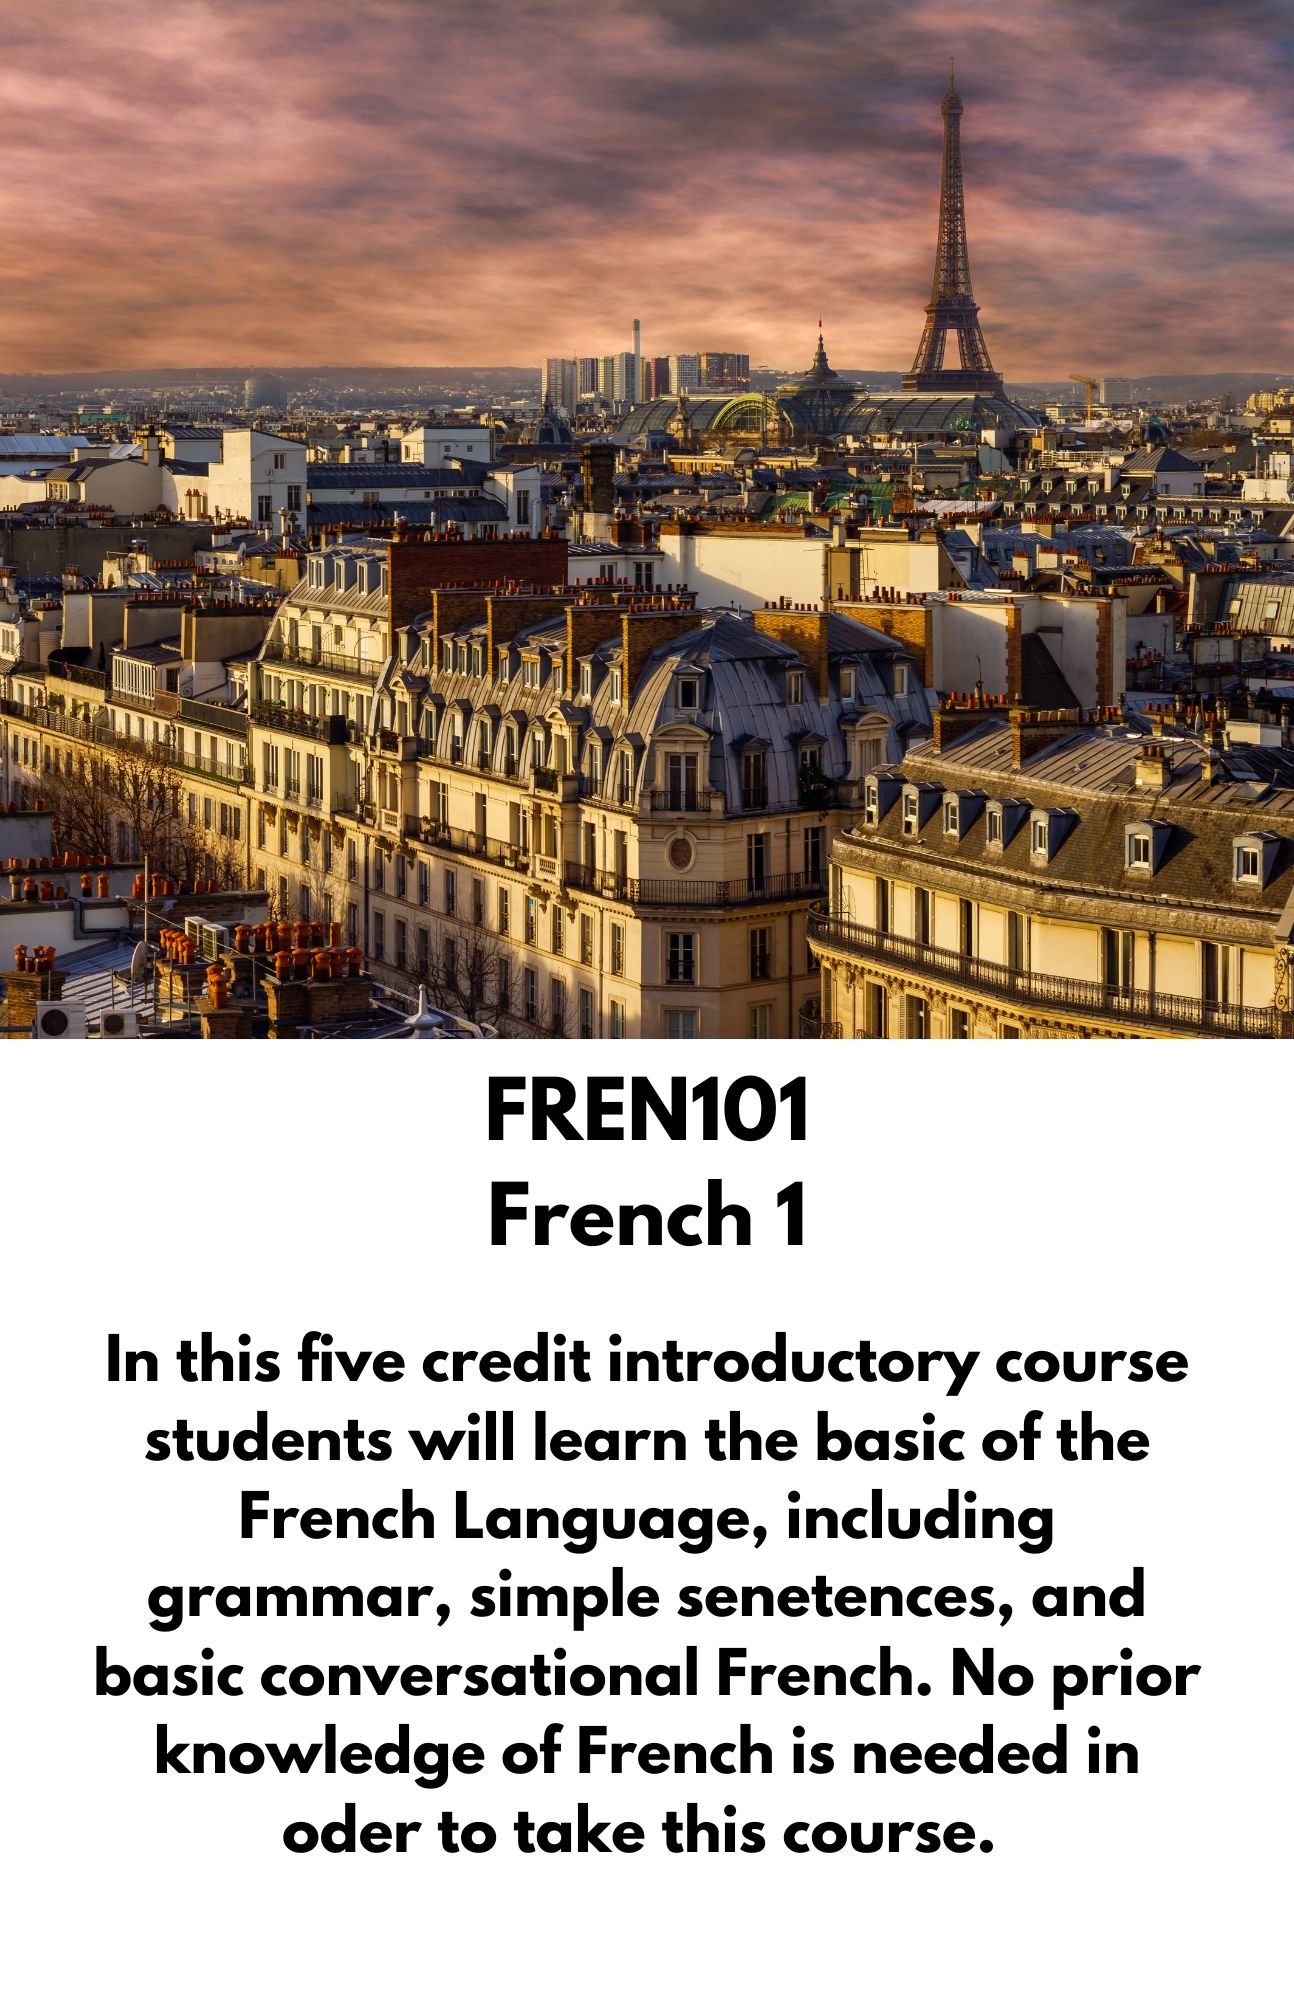 FREN101 French 1. In this five credit introductory course students will learn the basic of the French Language, including grammar, simple senetences, and basic conversational French. No prior knowledge of French is needed in oder to take this course.